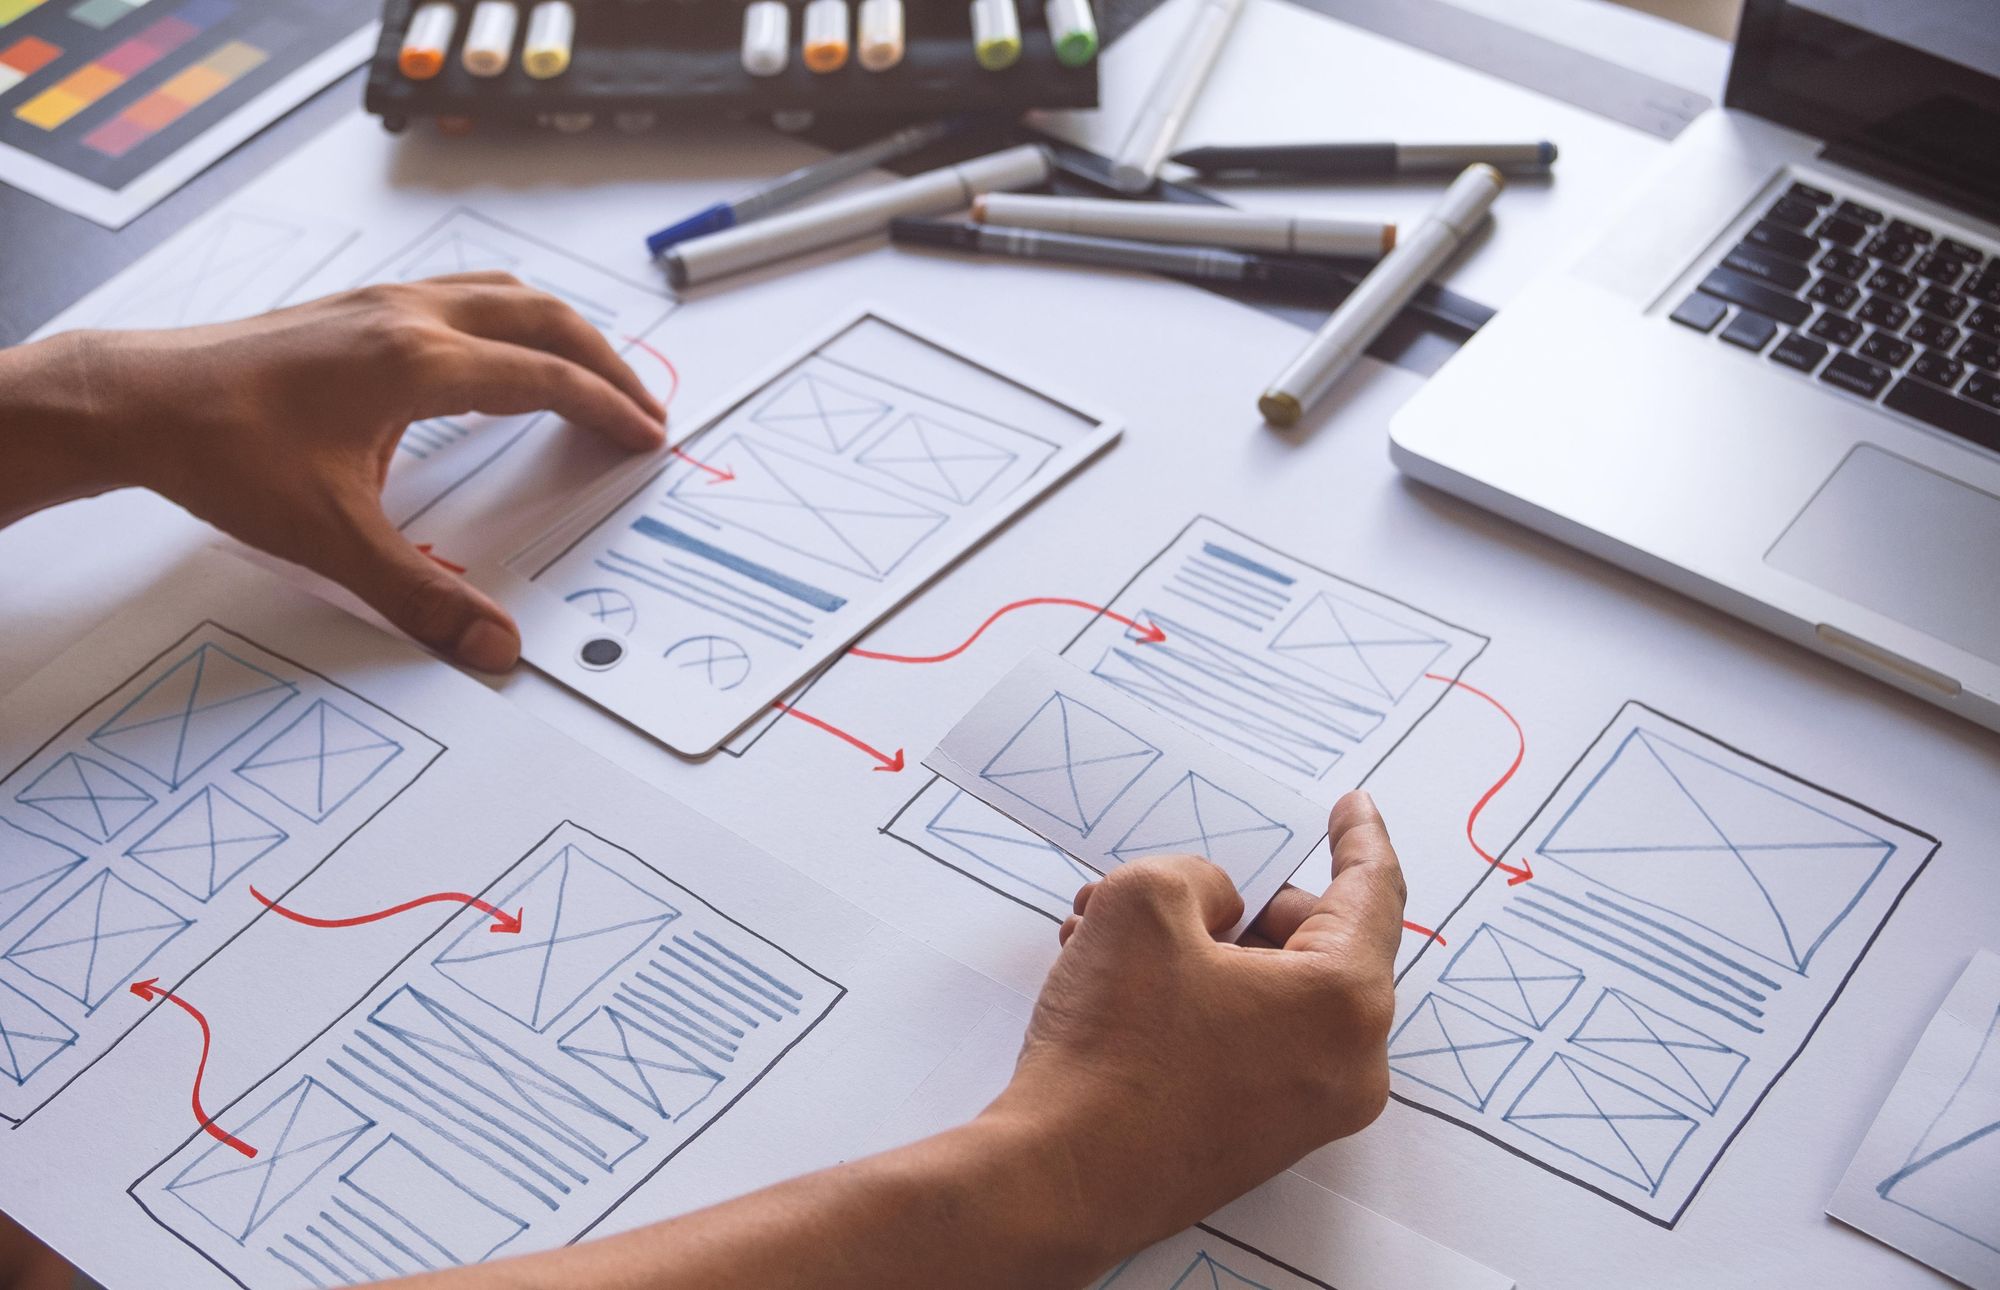 Person at a desk with layout plans for building a website.